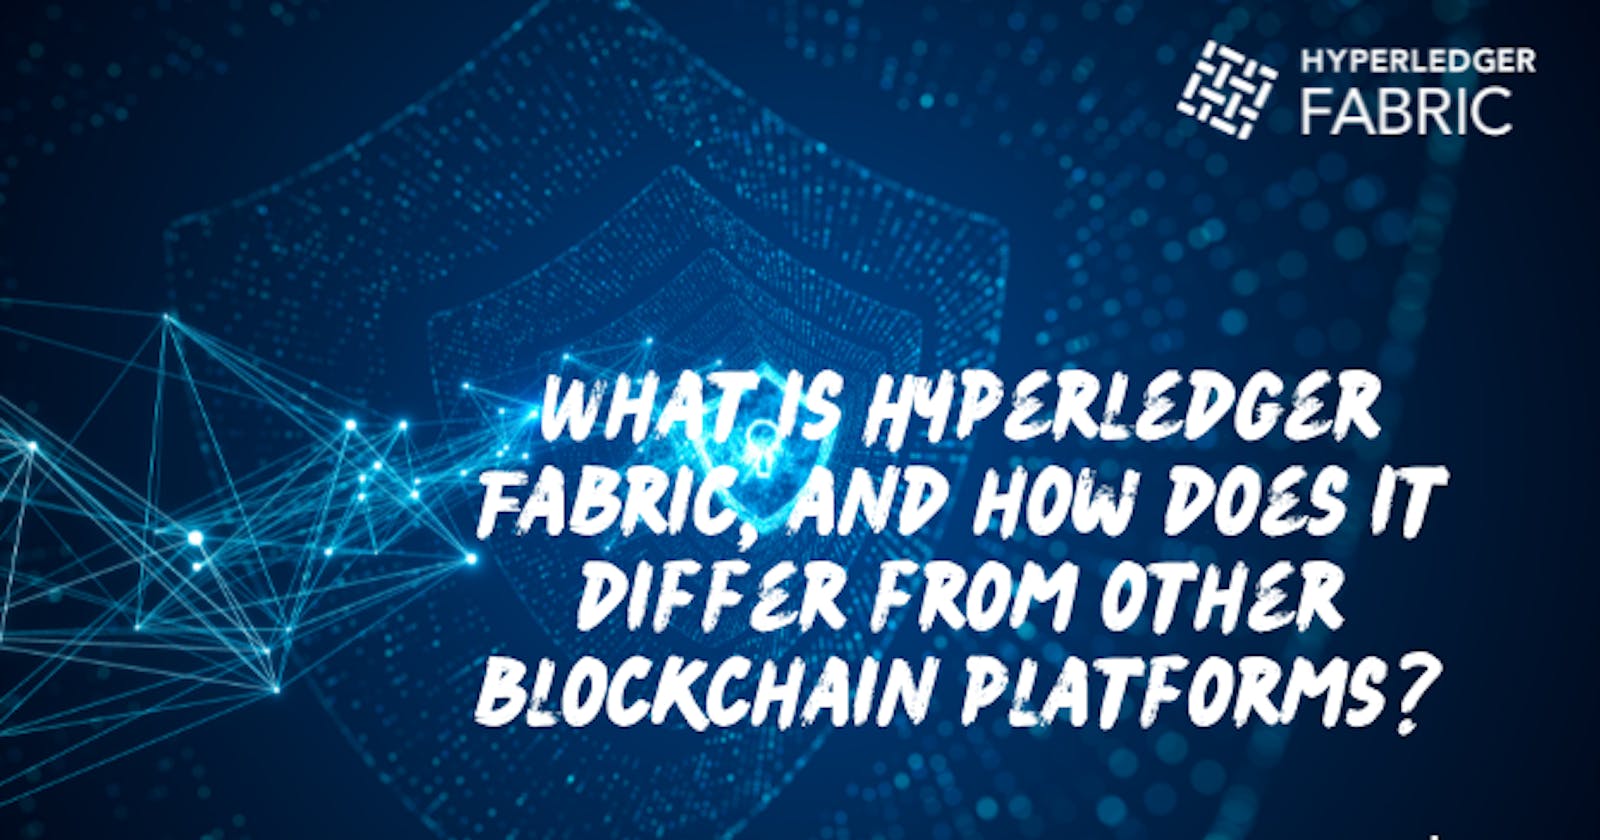 What is Hyperledger Fabric, and how does it differ from other blockchain platforms?